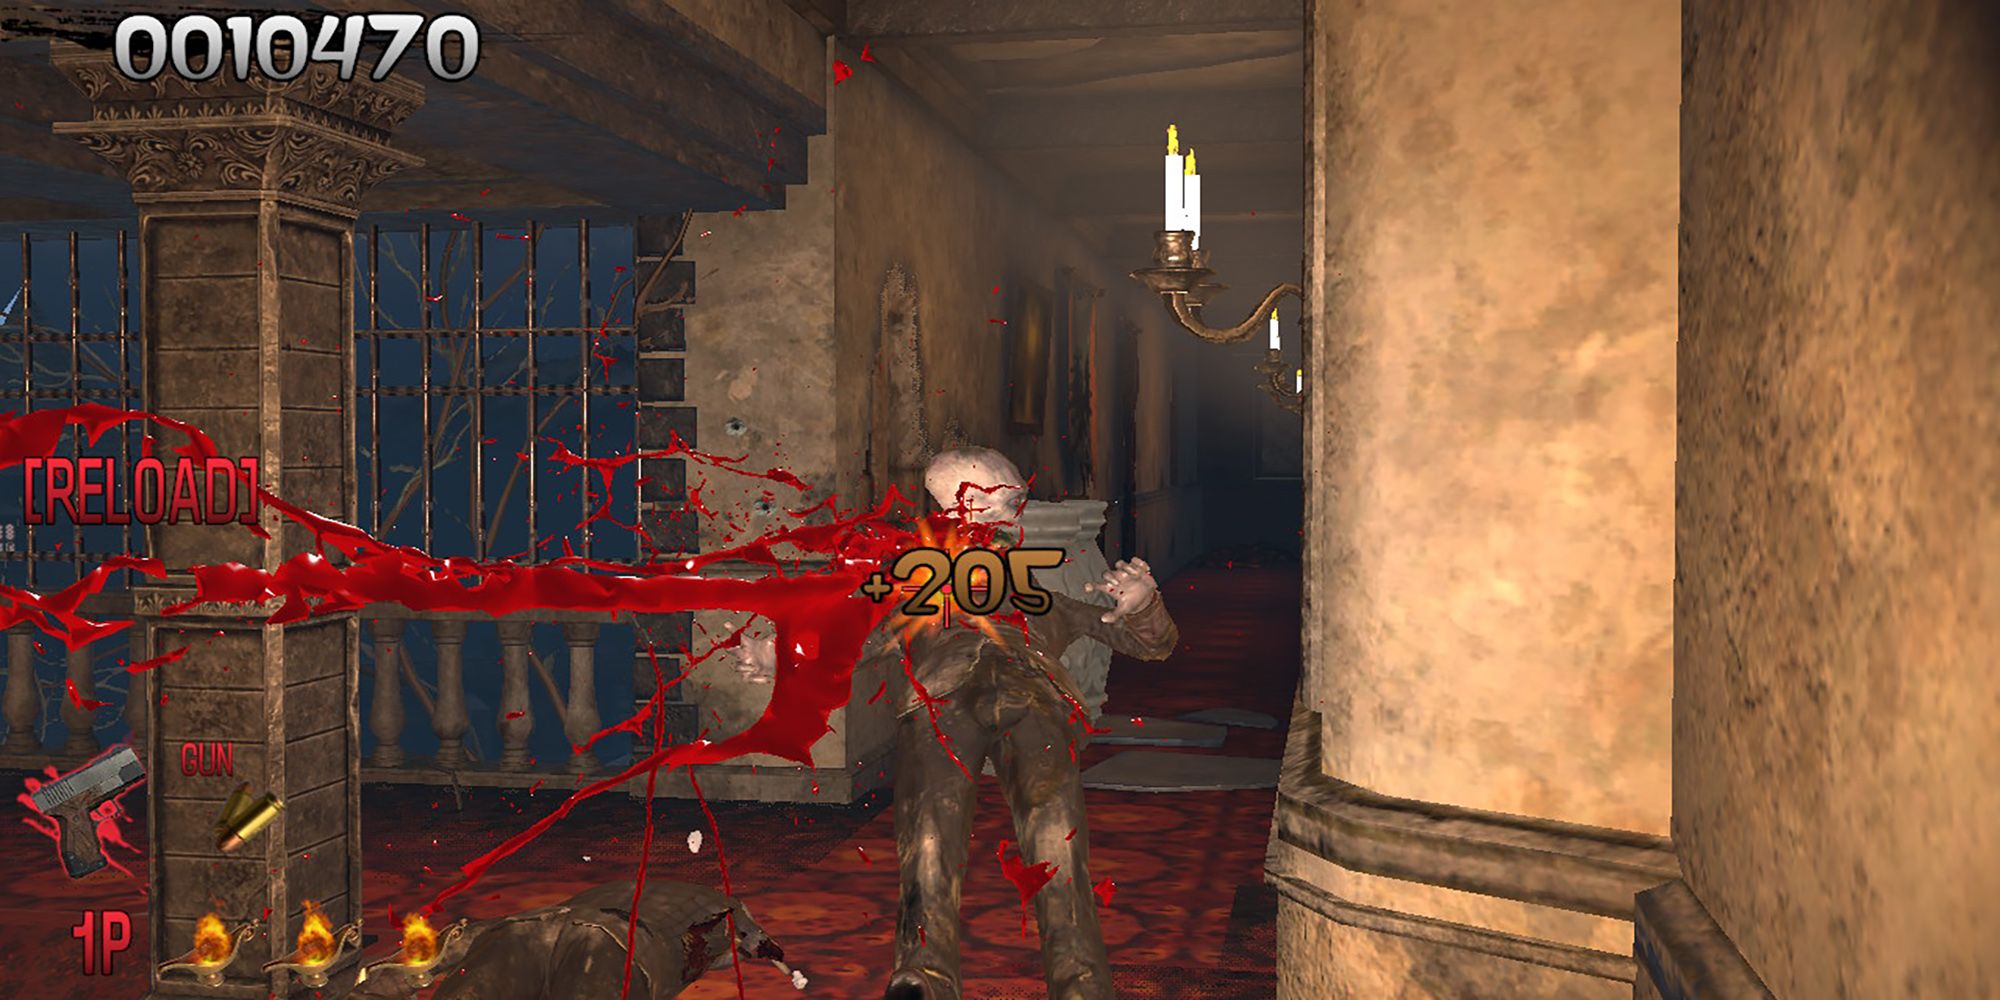 The player earns 205 points for nailing a headshot in a Classic scoring campaign of The House Of The Dead: Remake.